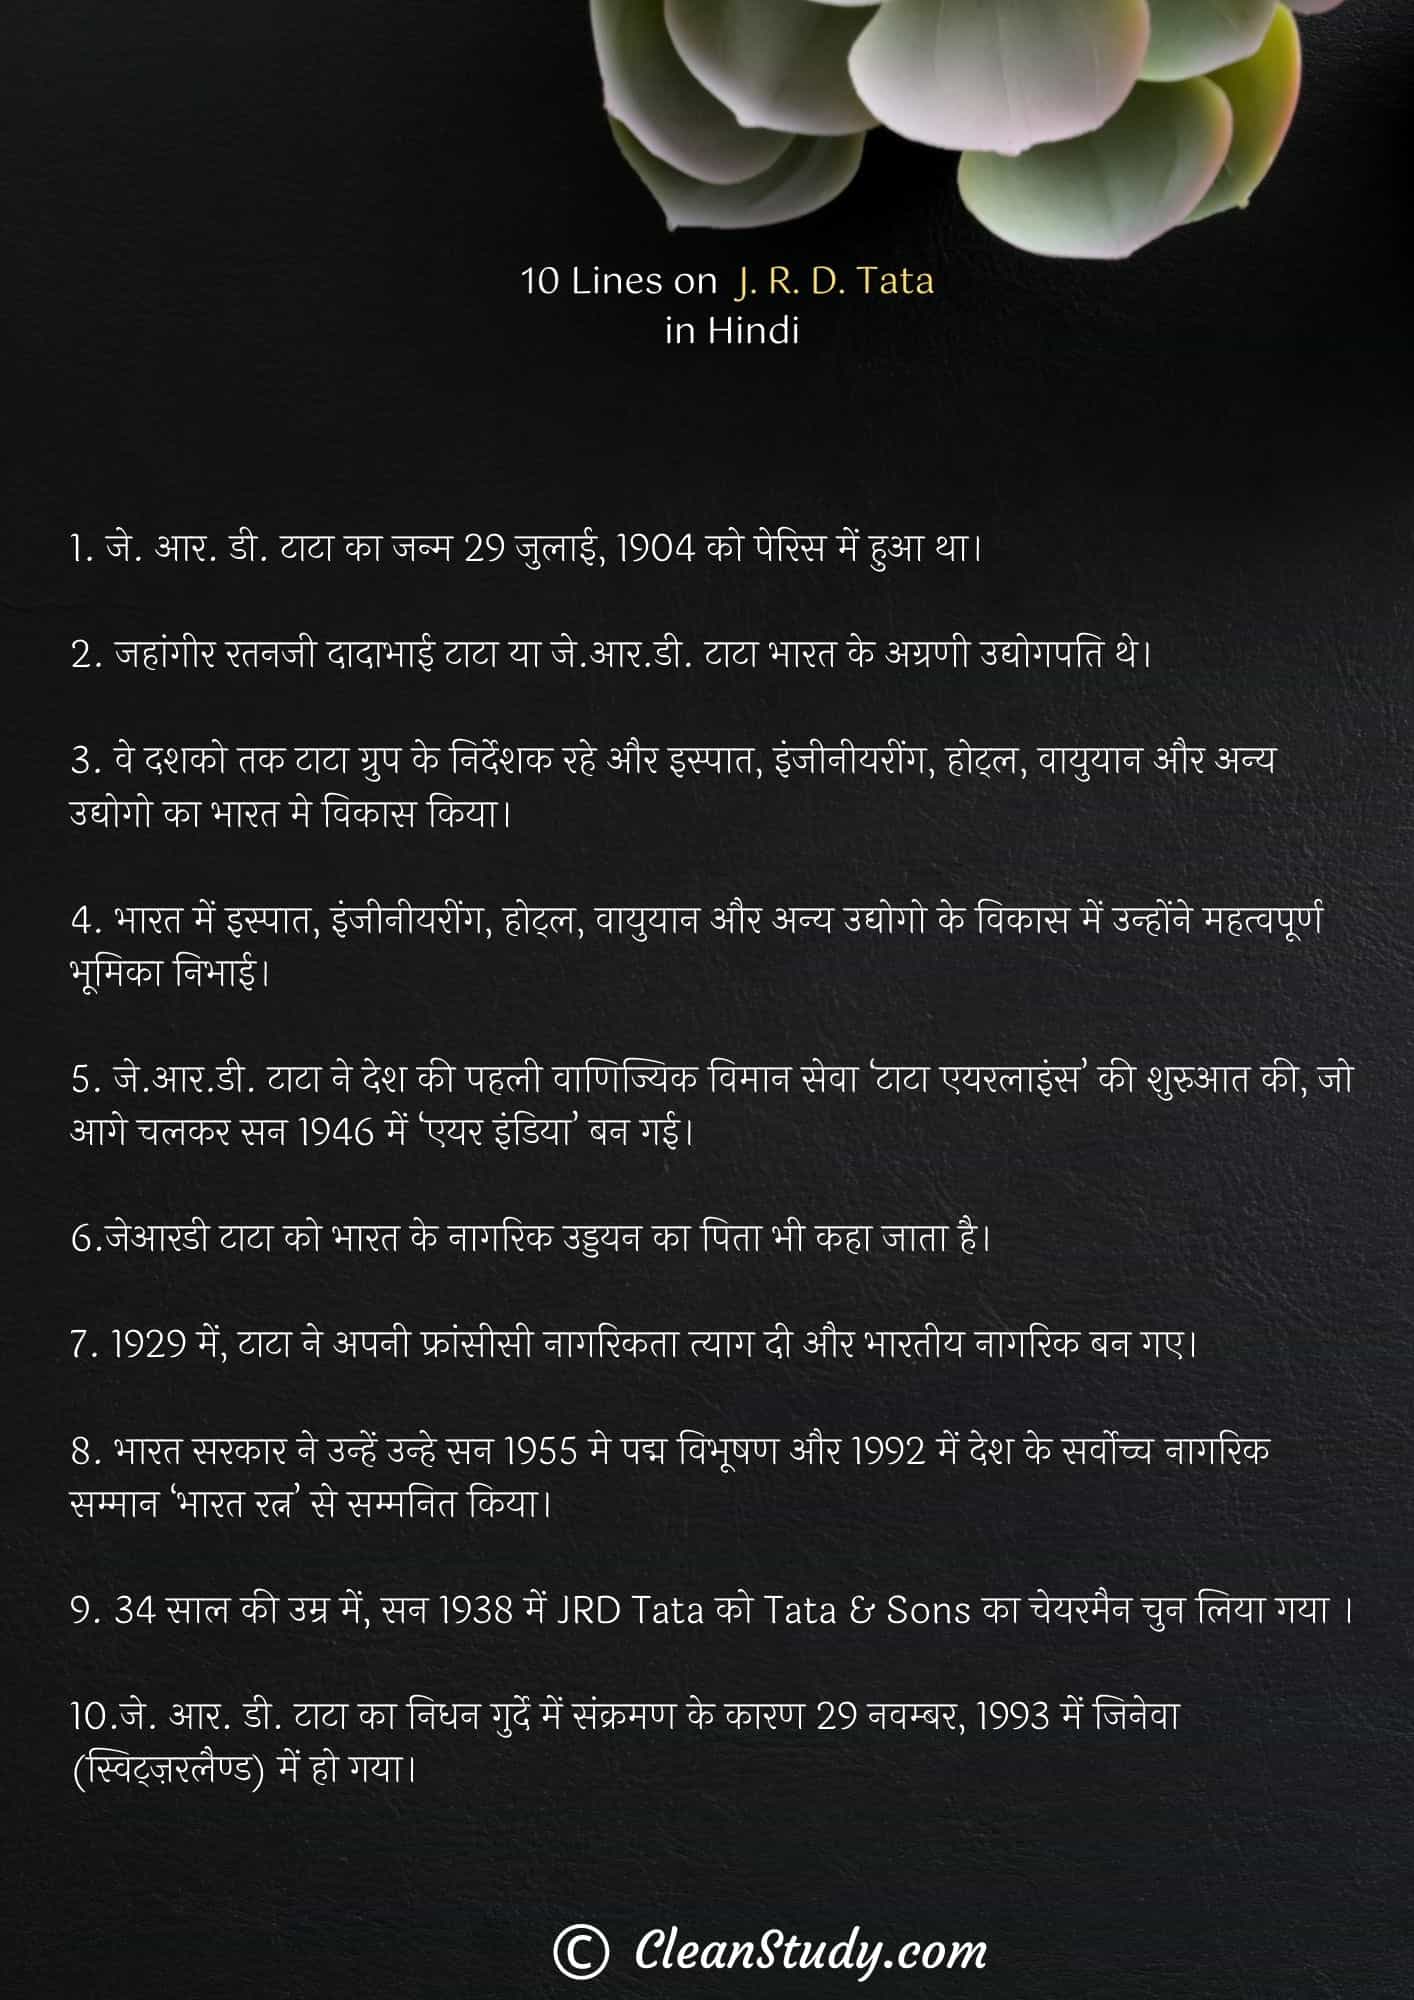 10 Lines on J. R. D. Tata in Hindi